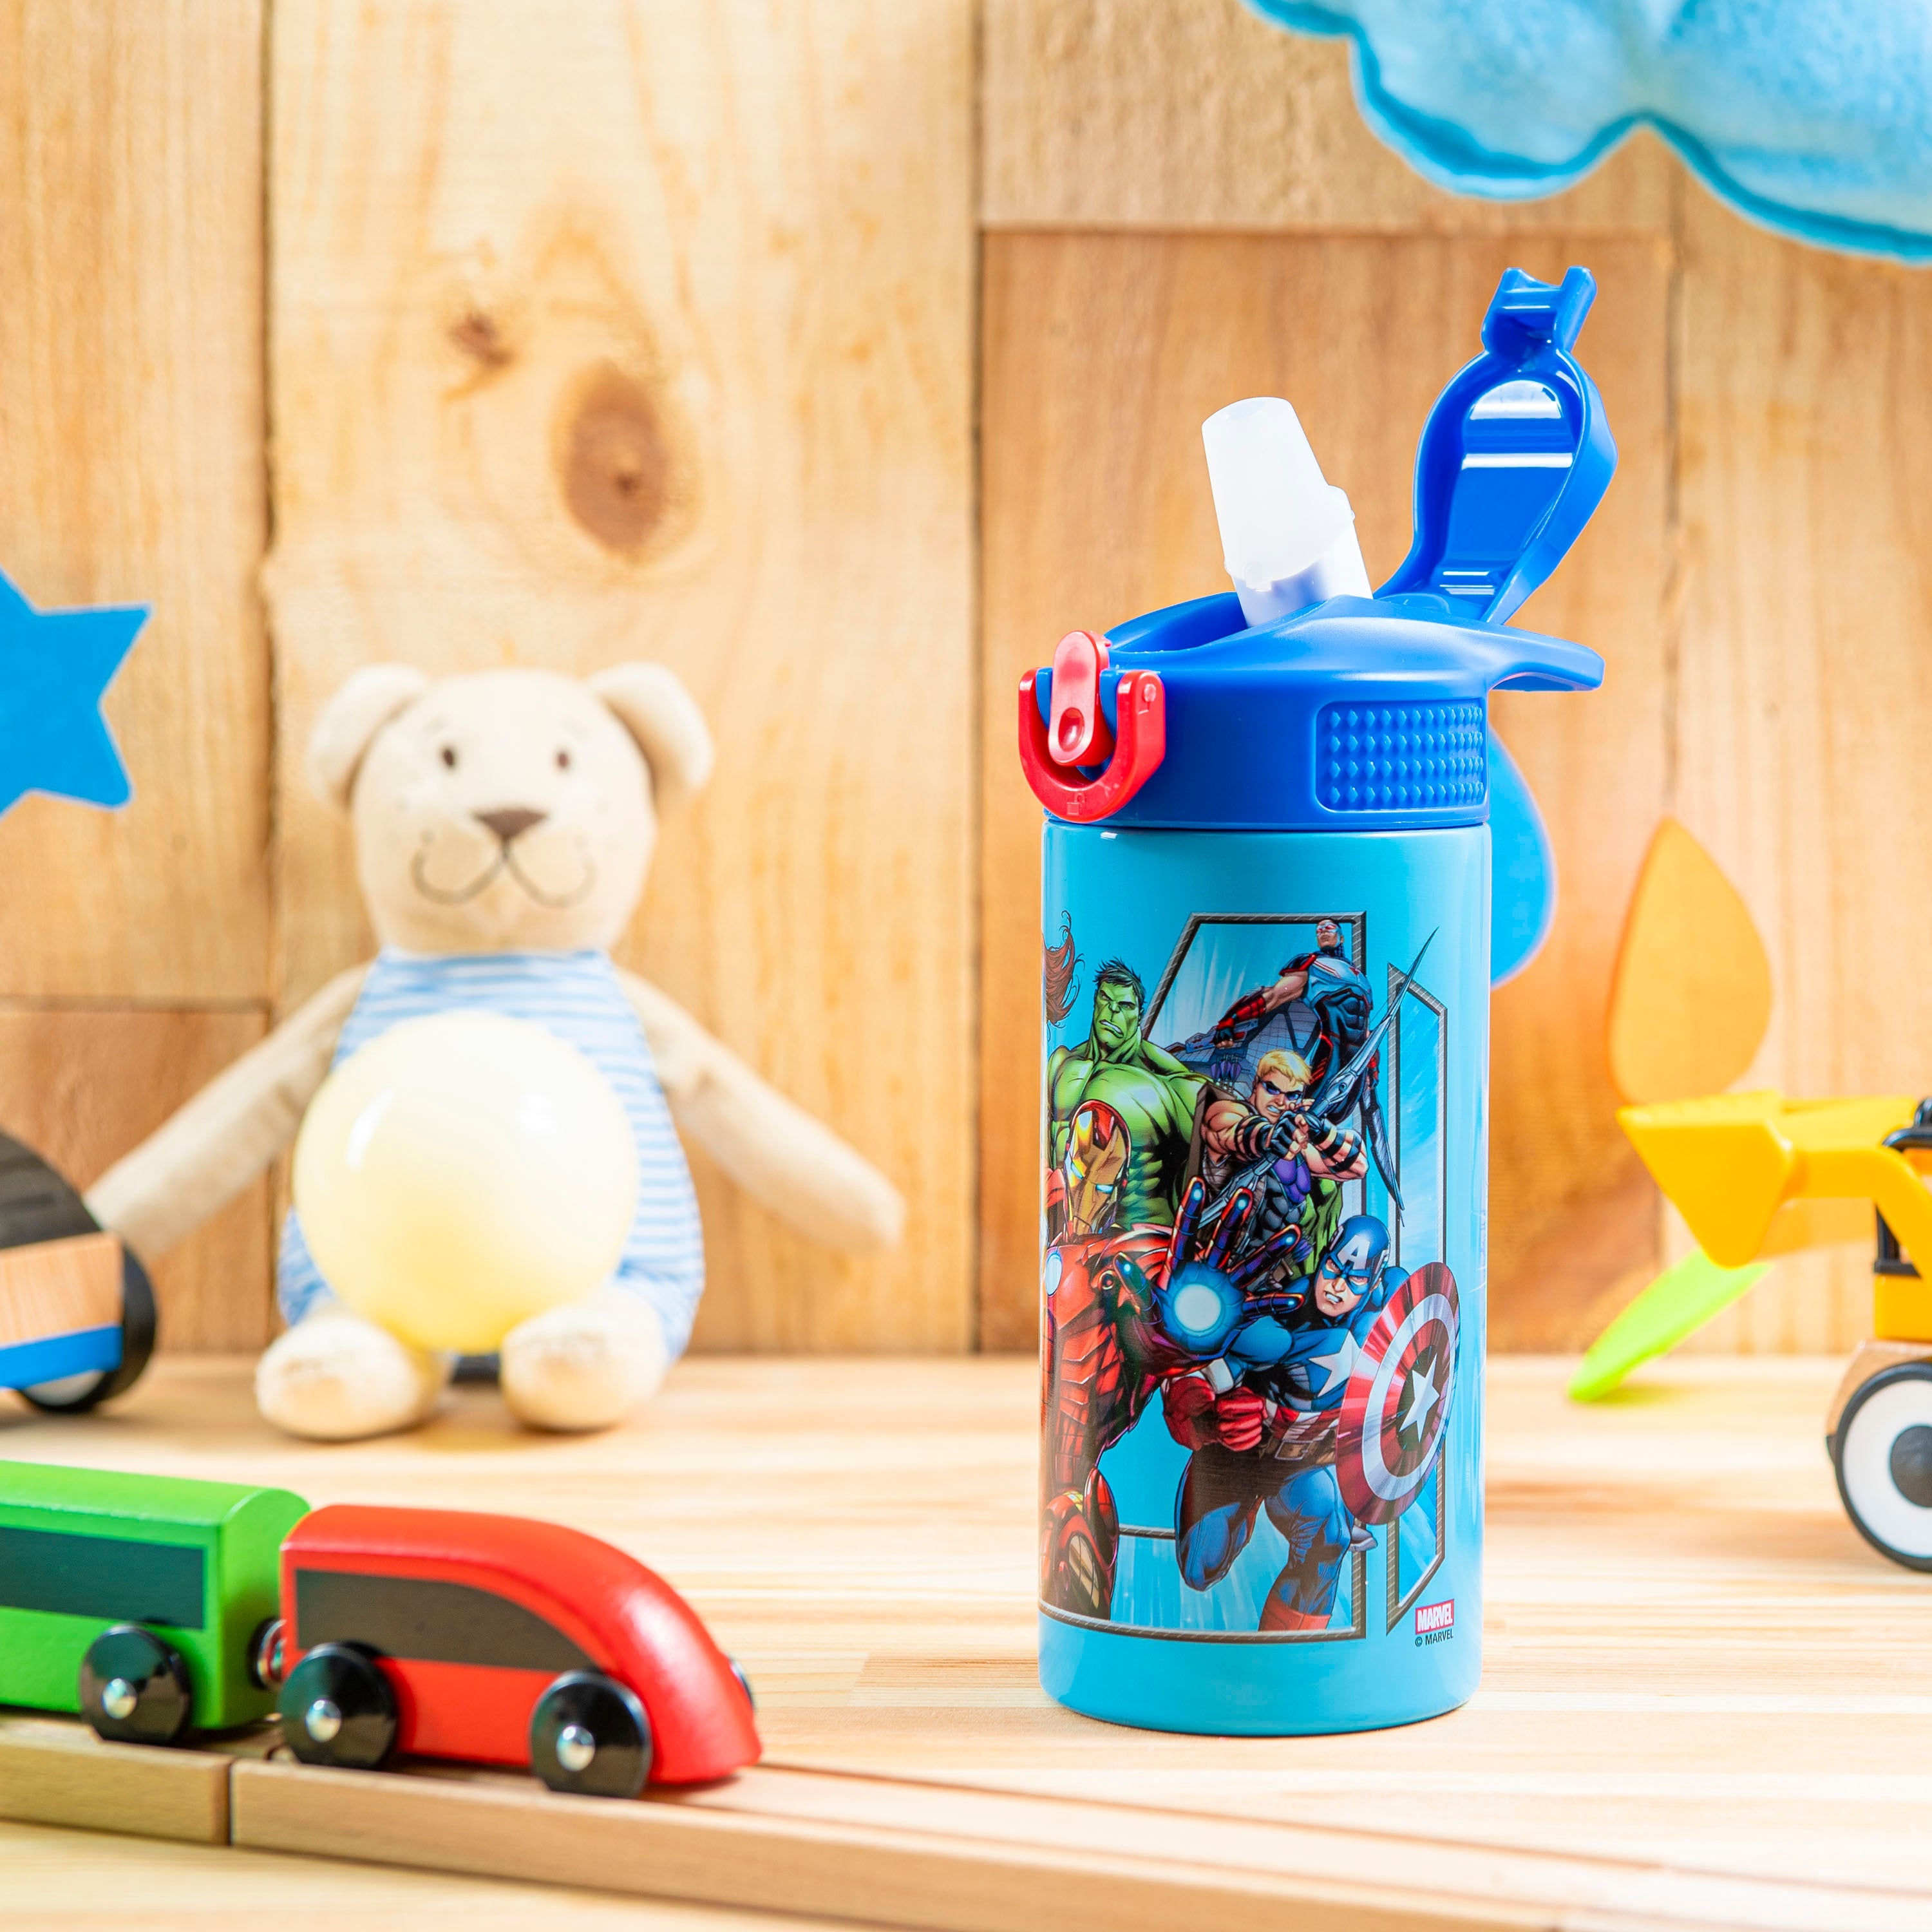 Cartoon Stitch Stainless Steel Vacuum Bottle Leakproof,Insulated for Hot or  Cold Stitch Water Bottle Travel Mug for Girl-11